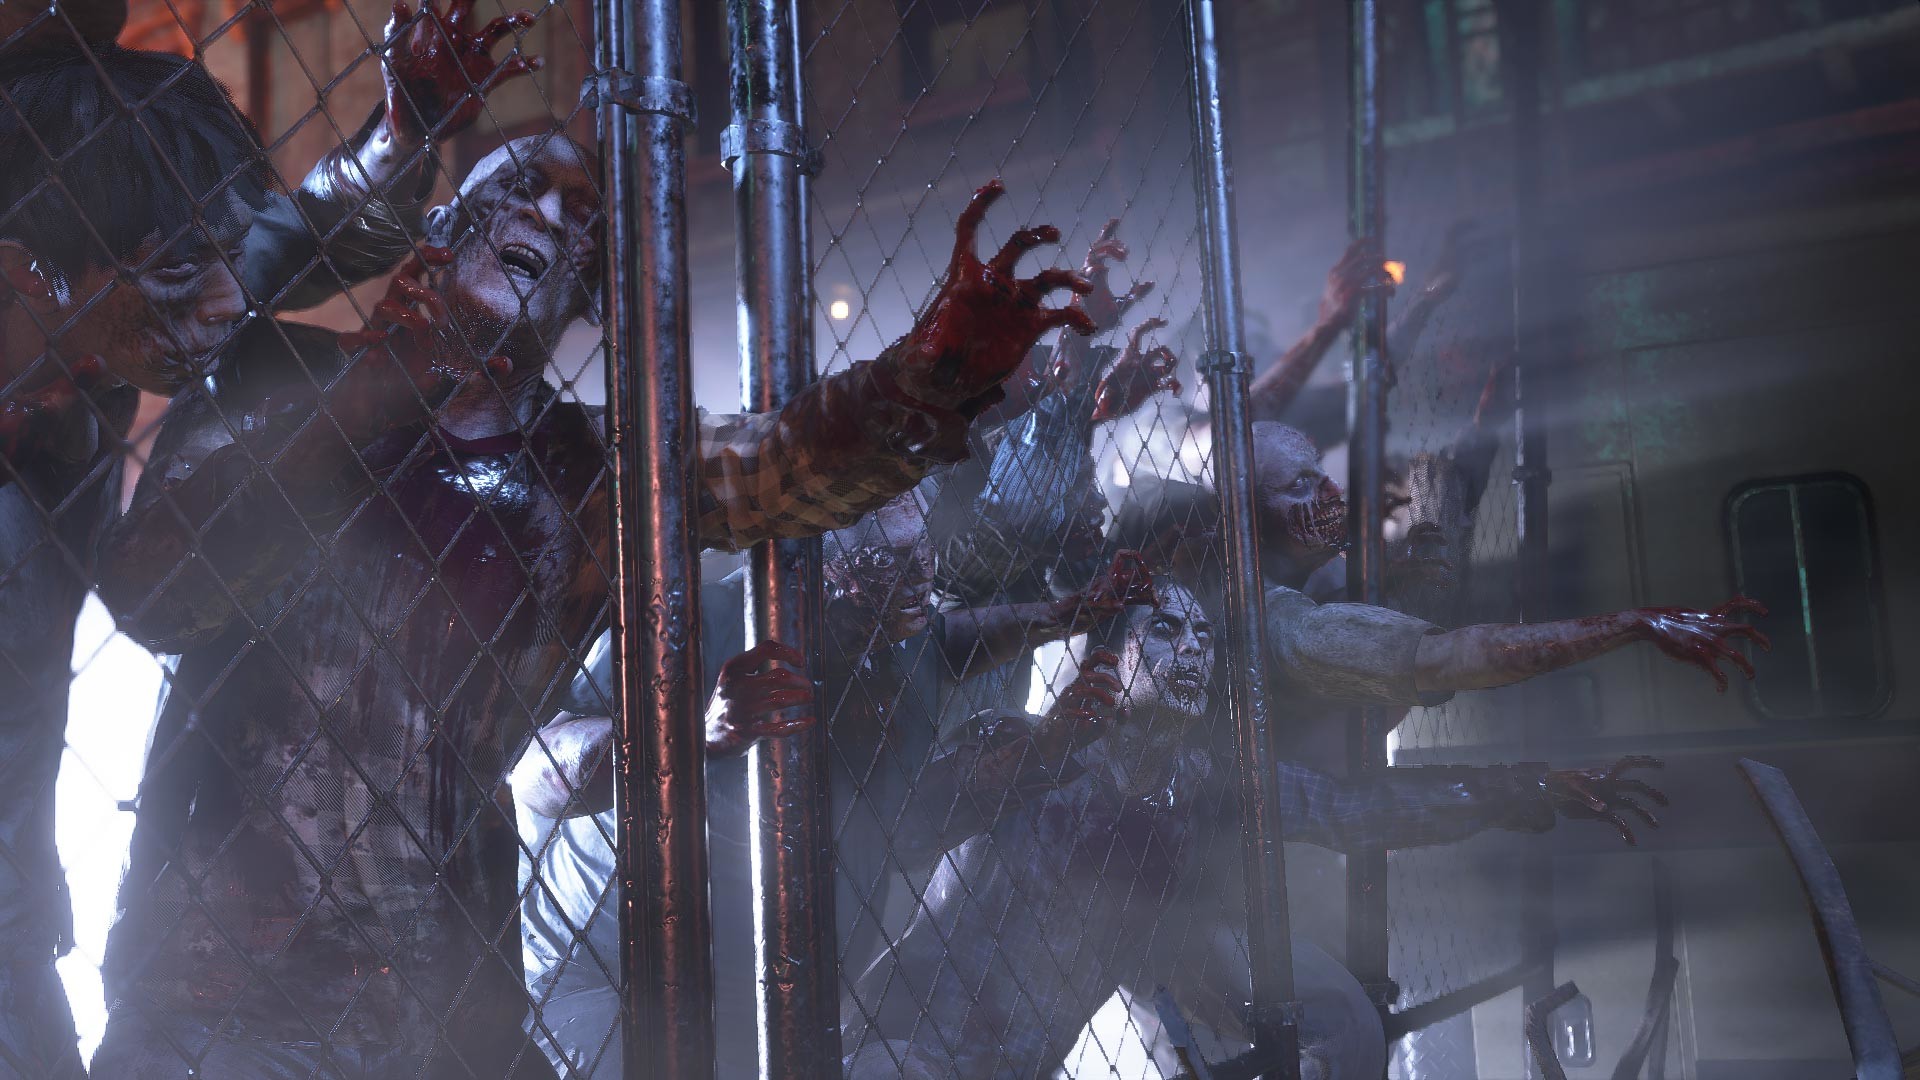 The Resident Evil Series Surpasses 100 Million Sales And Sets A Milestone For Capcom